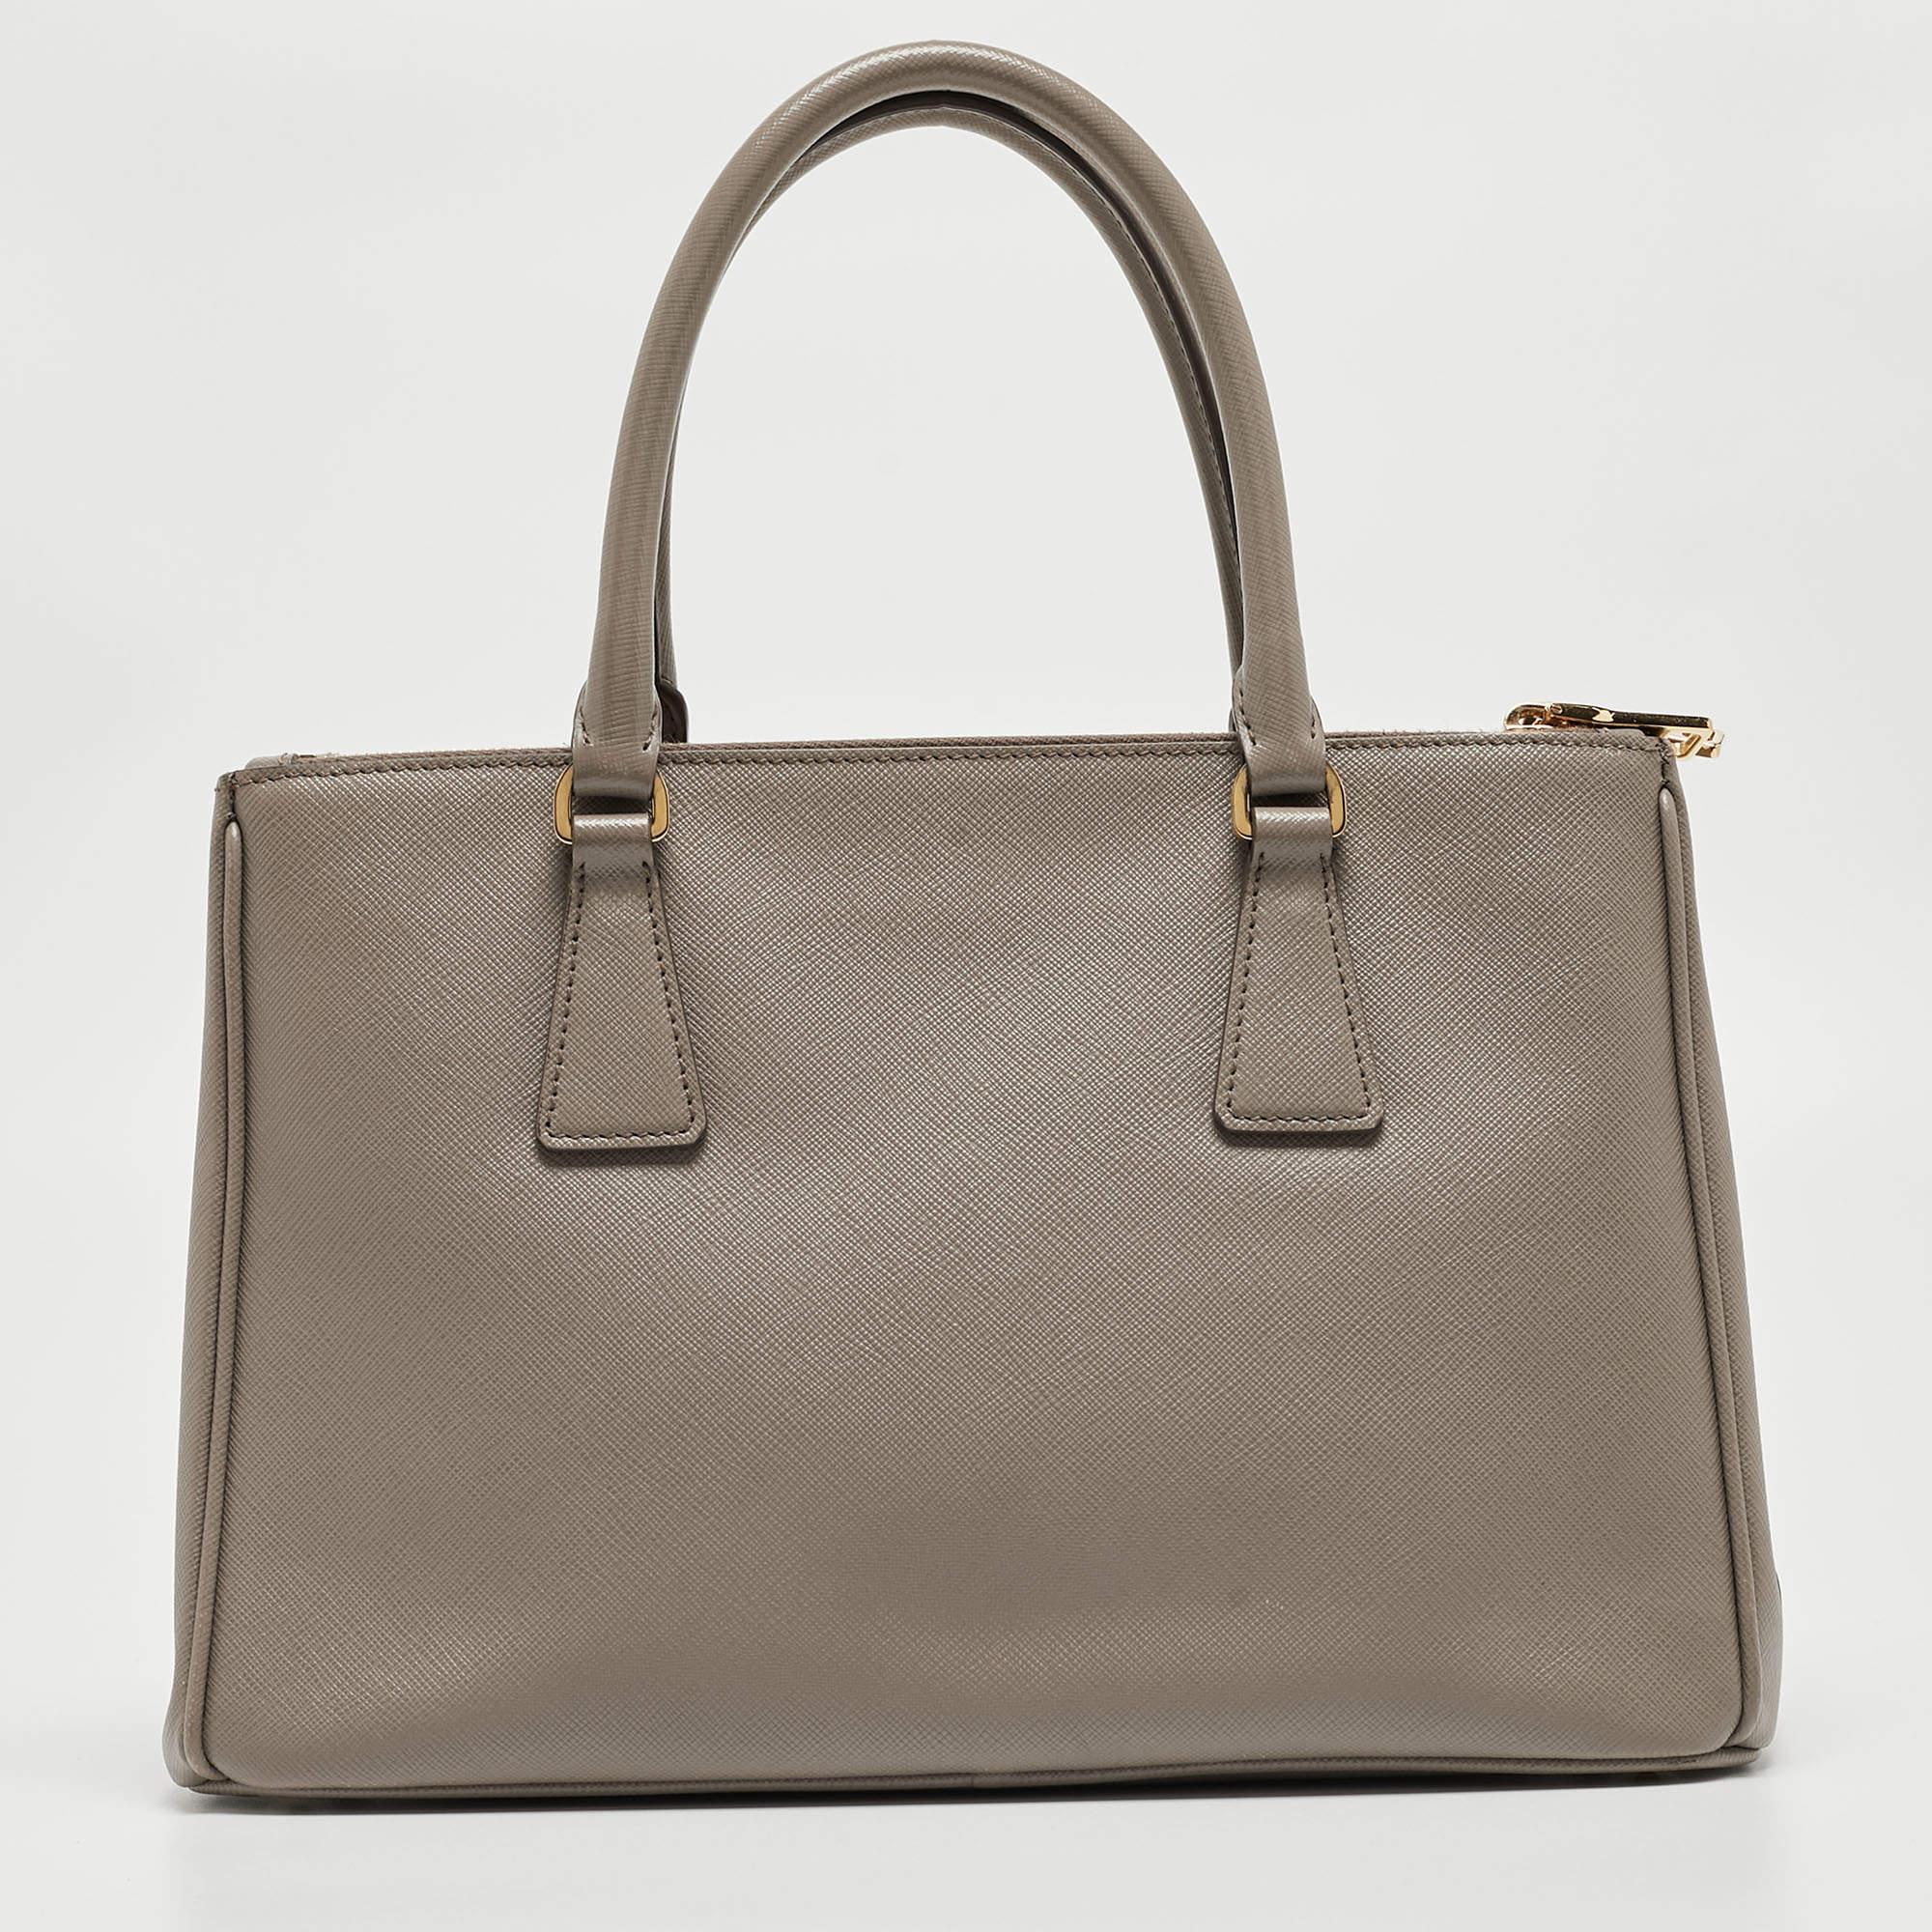 Loved for its classic appeal and functional design, Galleria is one of the most iconic and popular bags from the house of Prada. This beauty in dark beige is crafted from Saffiano Lux leather and is equipped with two top handles, the brand logo at